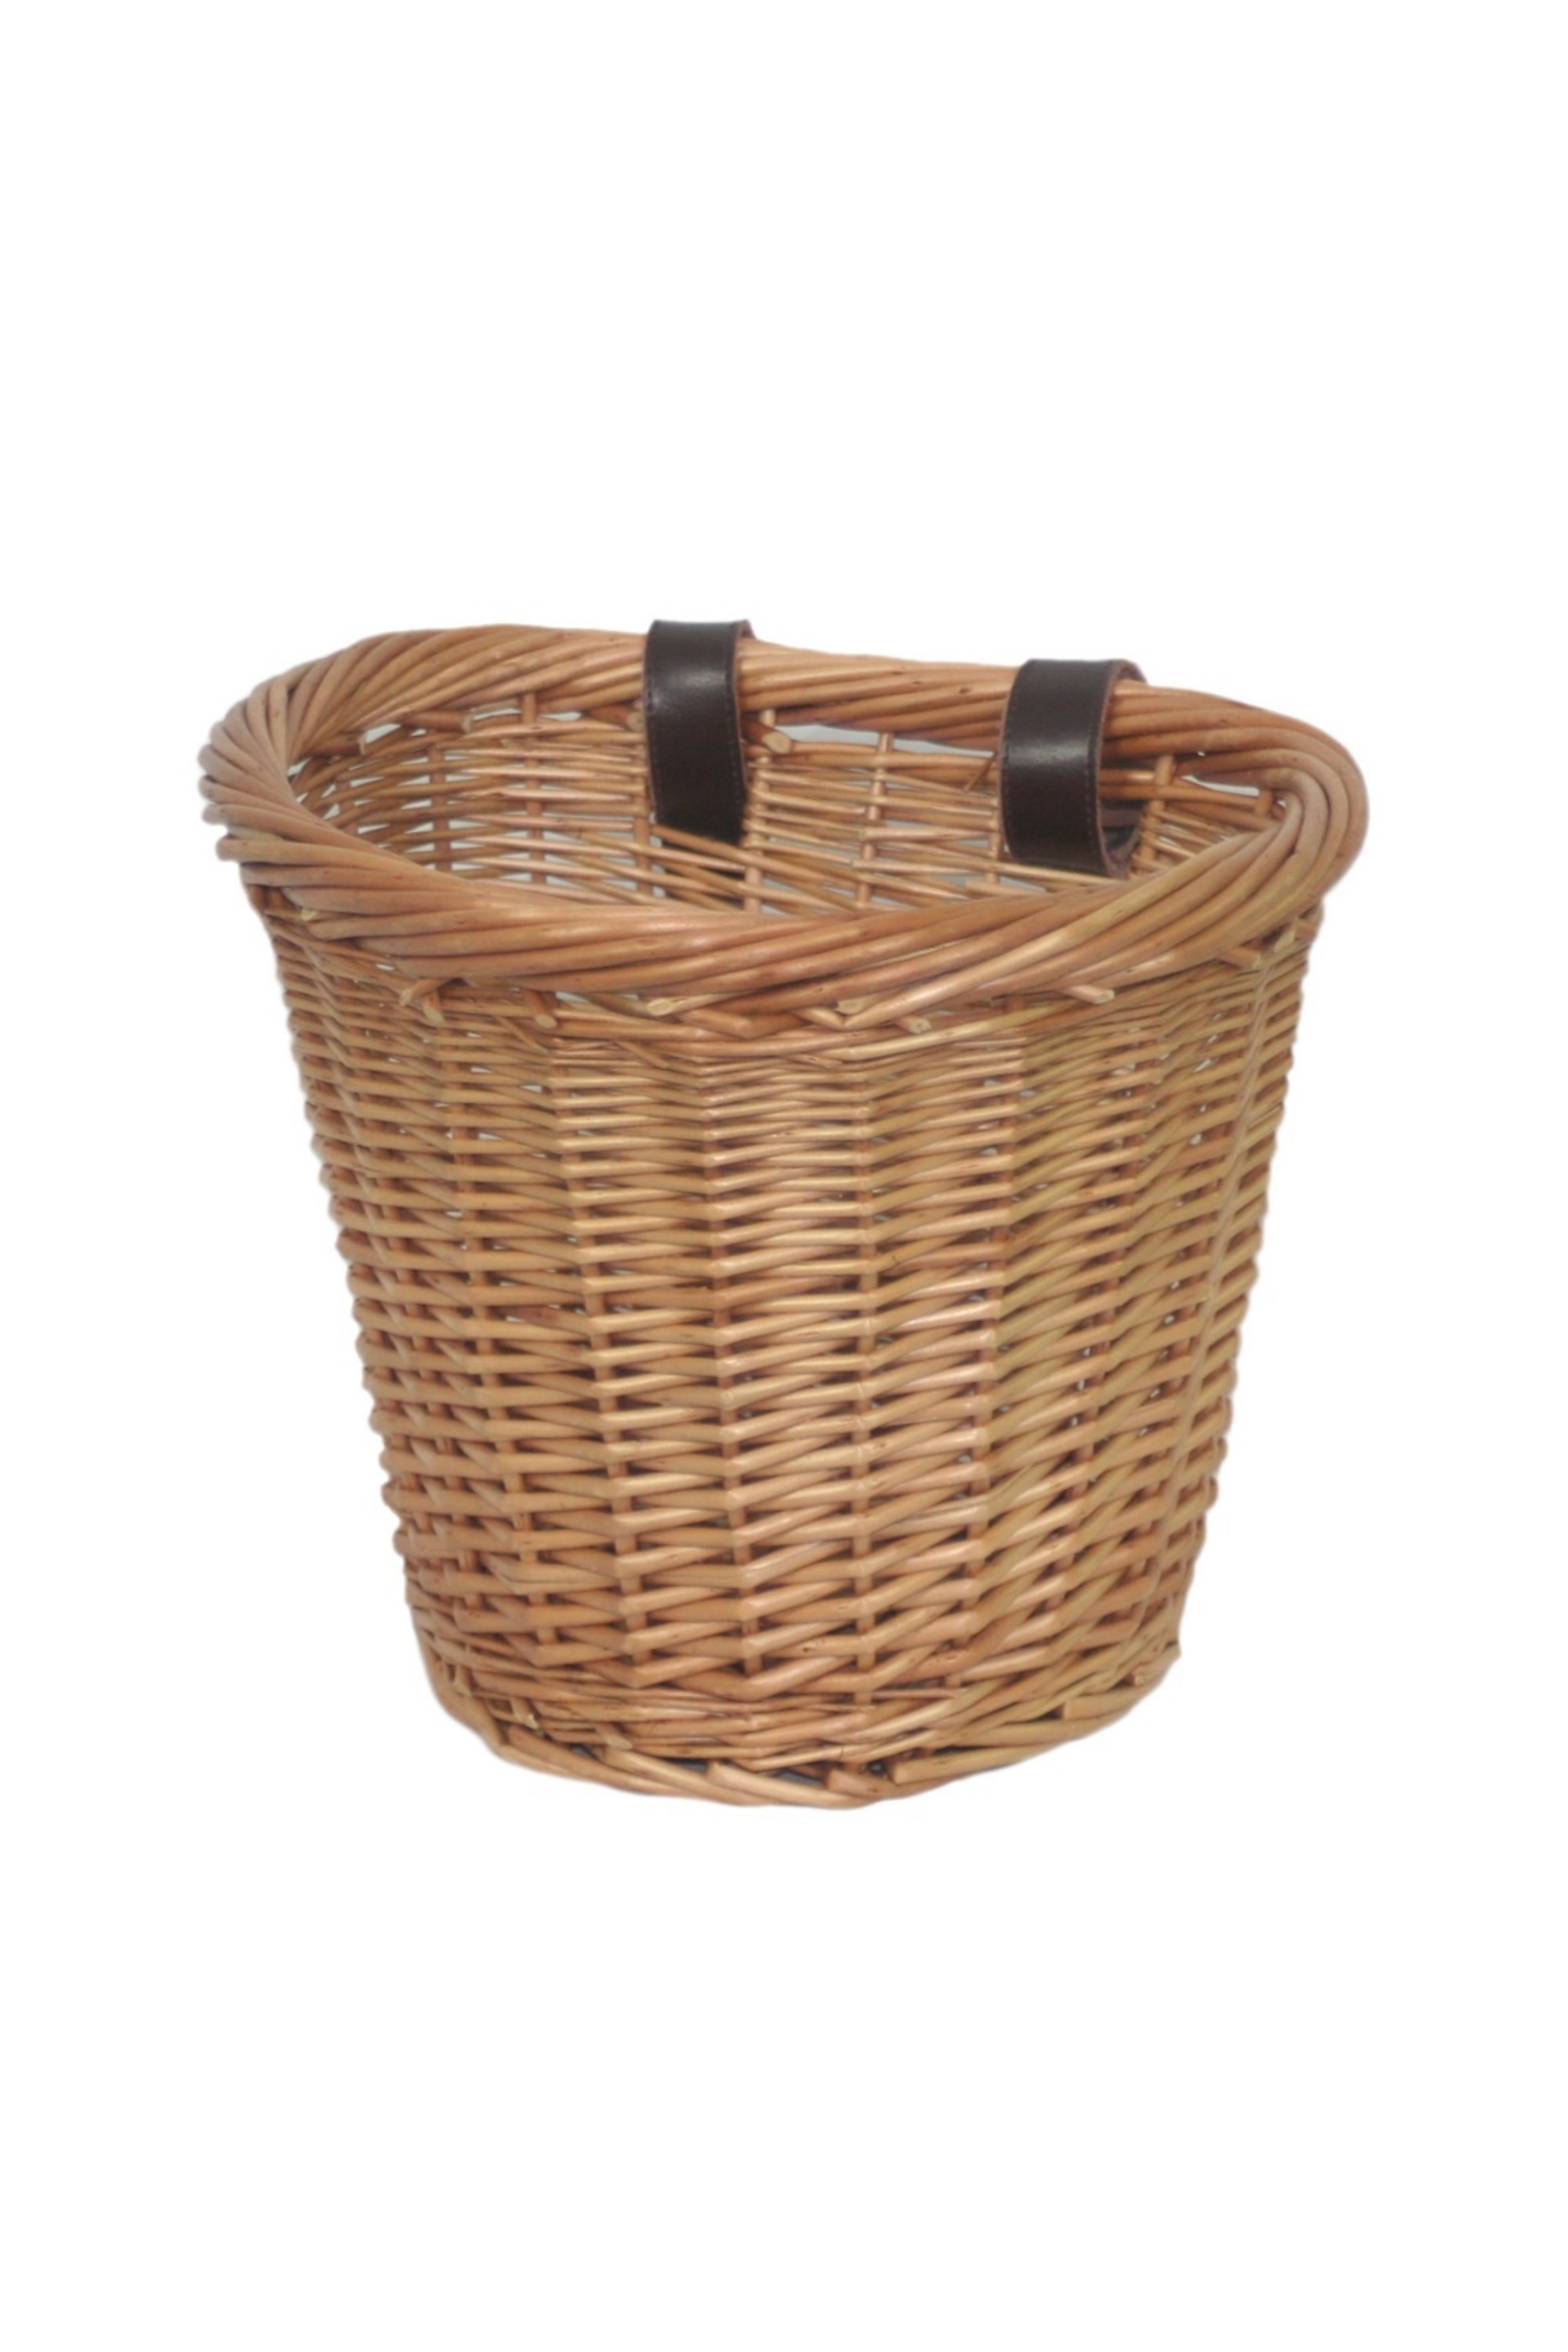 Wicker Heritage Oval Bicycle Basket -